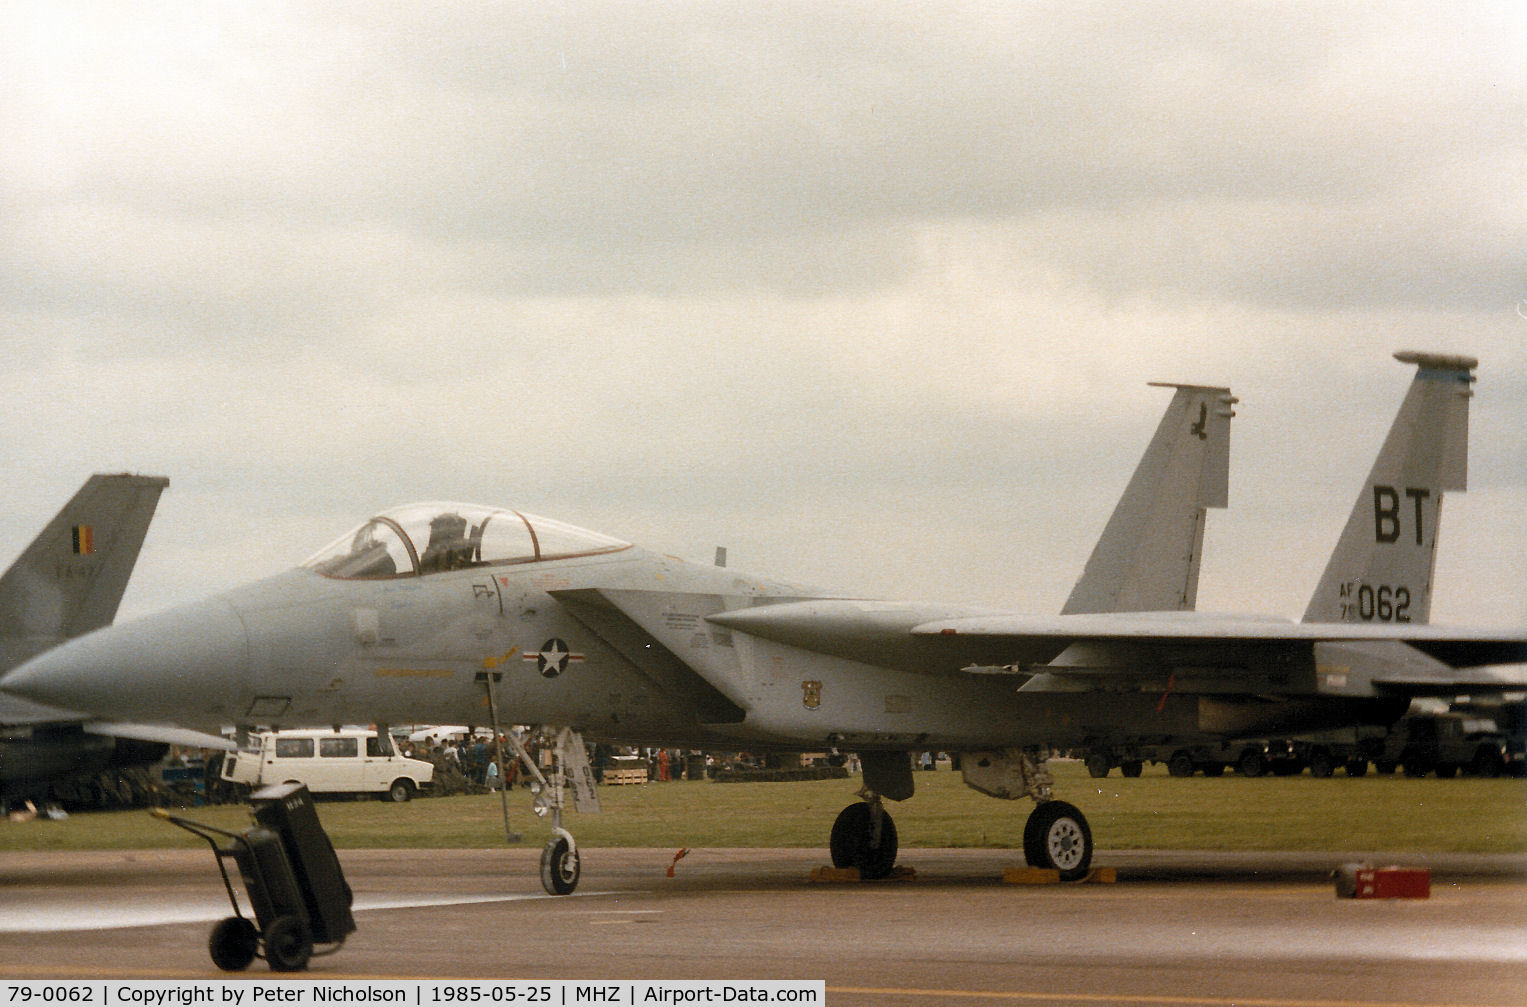 79-0062, 1979 McDonnell Douglas F-15C Eagle C/N 0608/C131, F-15C Eagle of 36th Tactical Fighter Wing based at Bitburg on the flight-line at the 1985 RAF Mildenhall Air Fete.